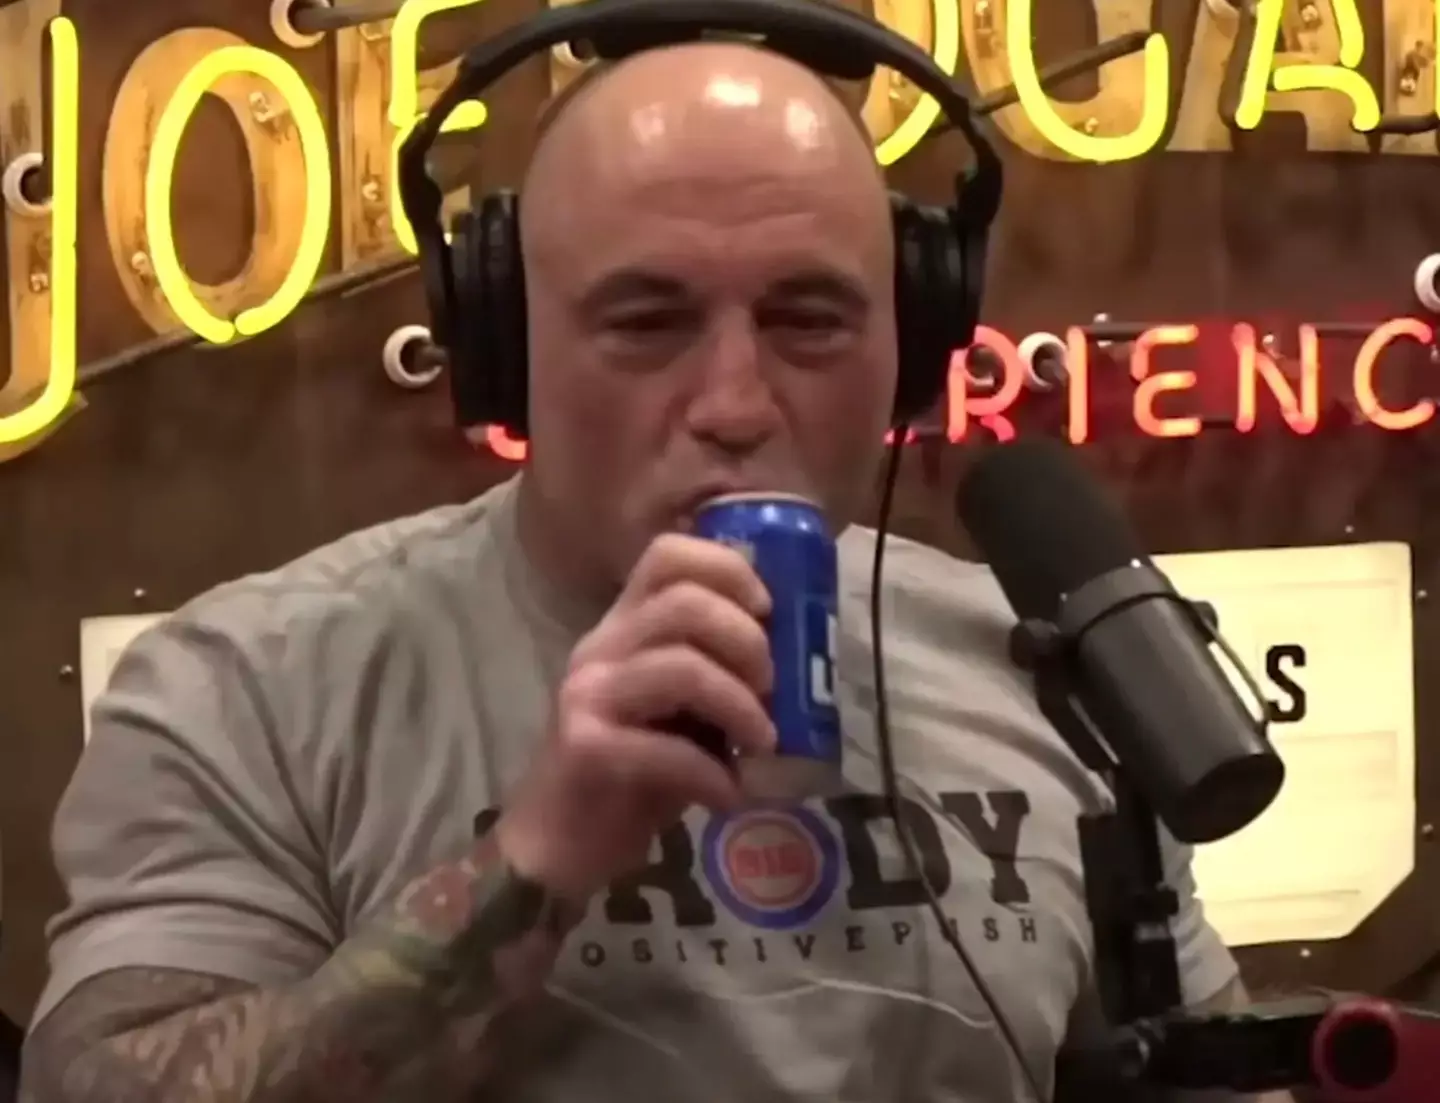 Joe Rogan said the outrage was just silly.